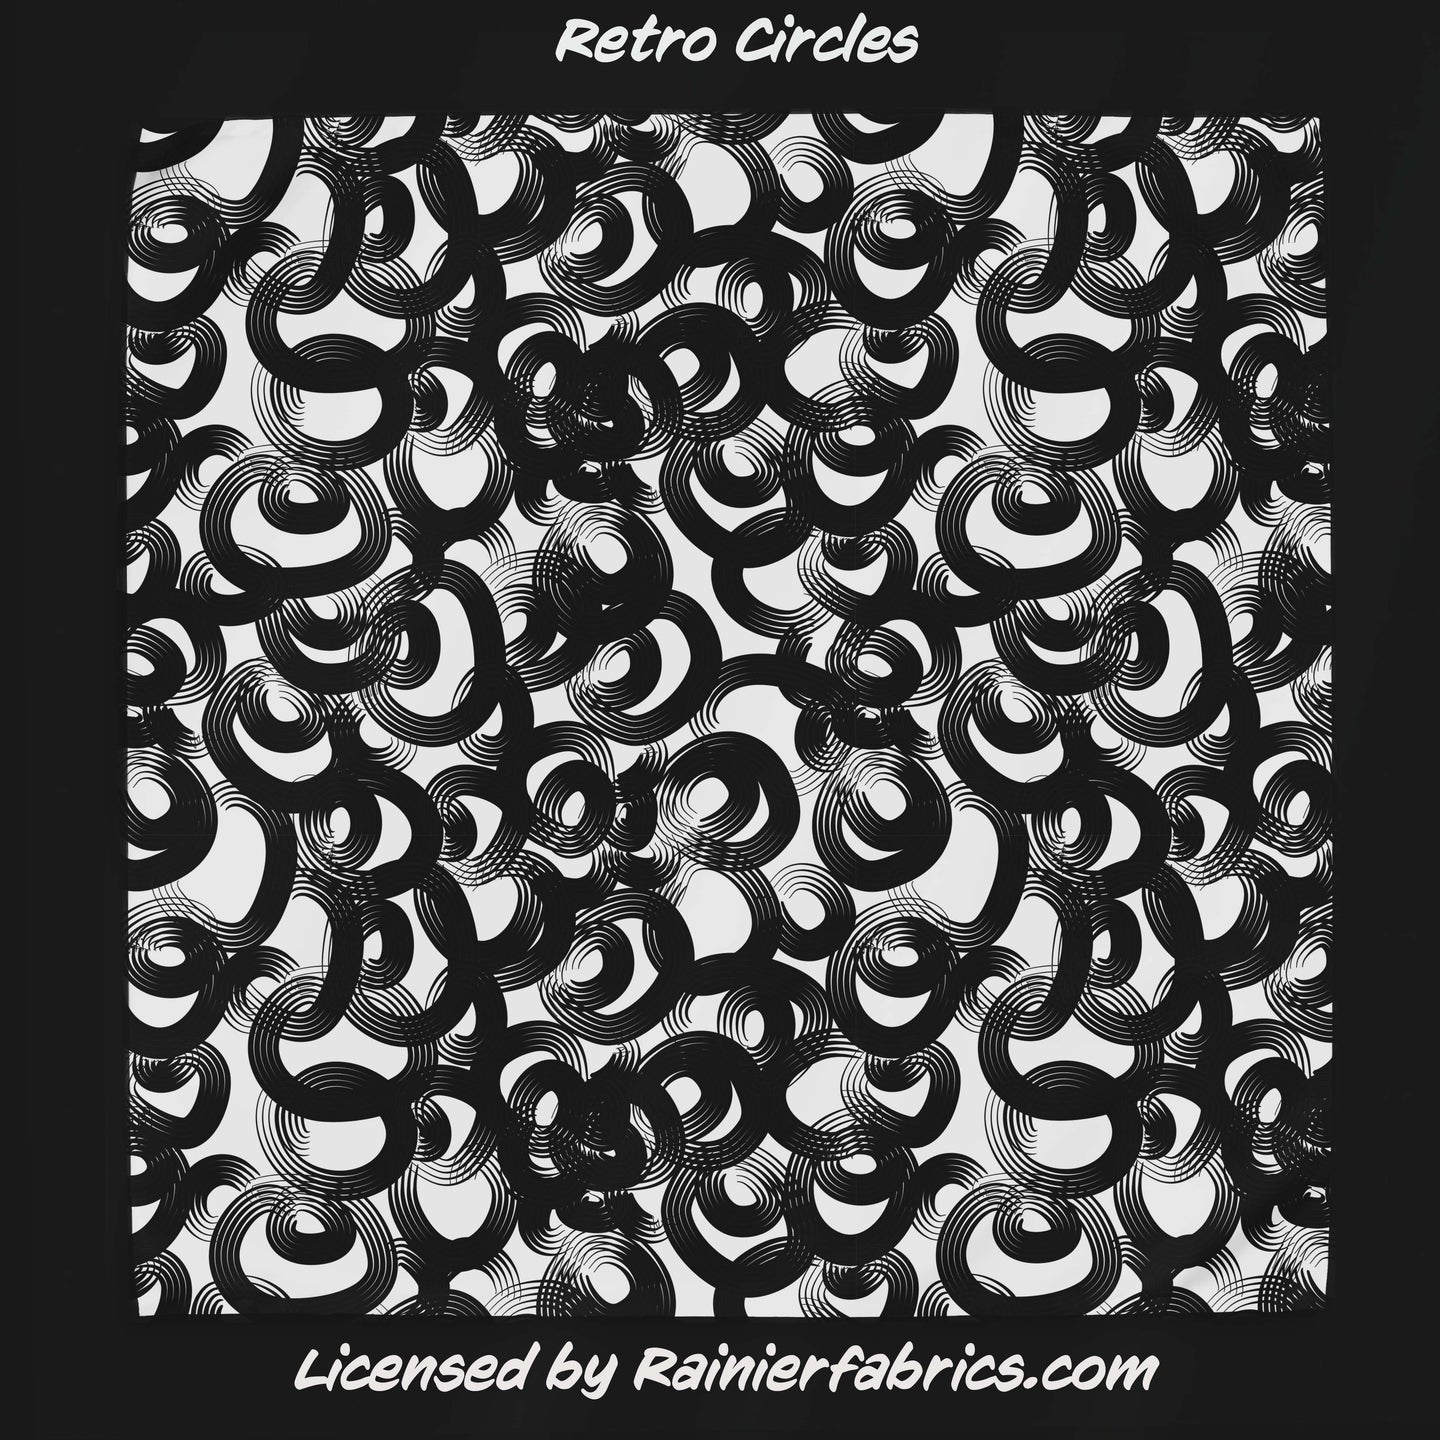 Retro Circles - 2-5 day TAT - Order by 1/2 yard; Blankets and towels available too